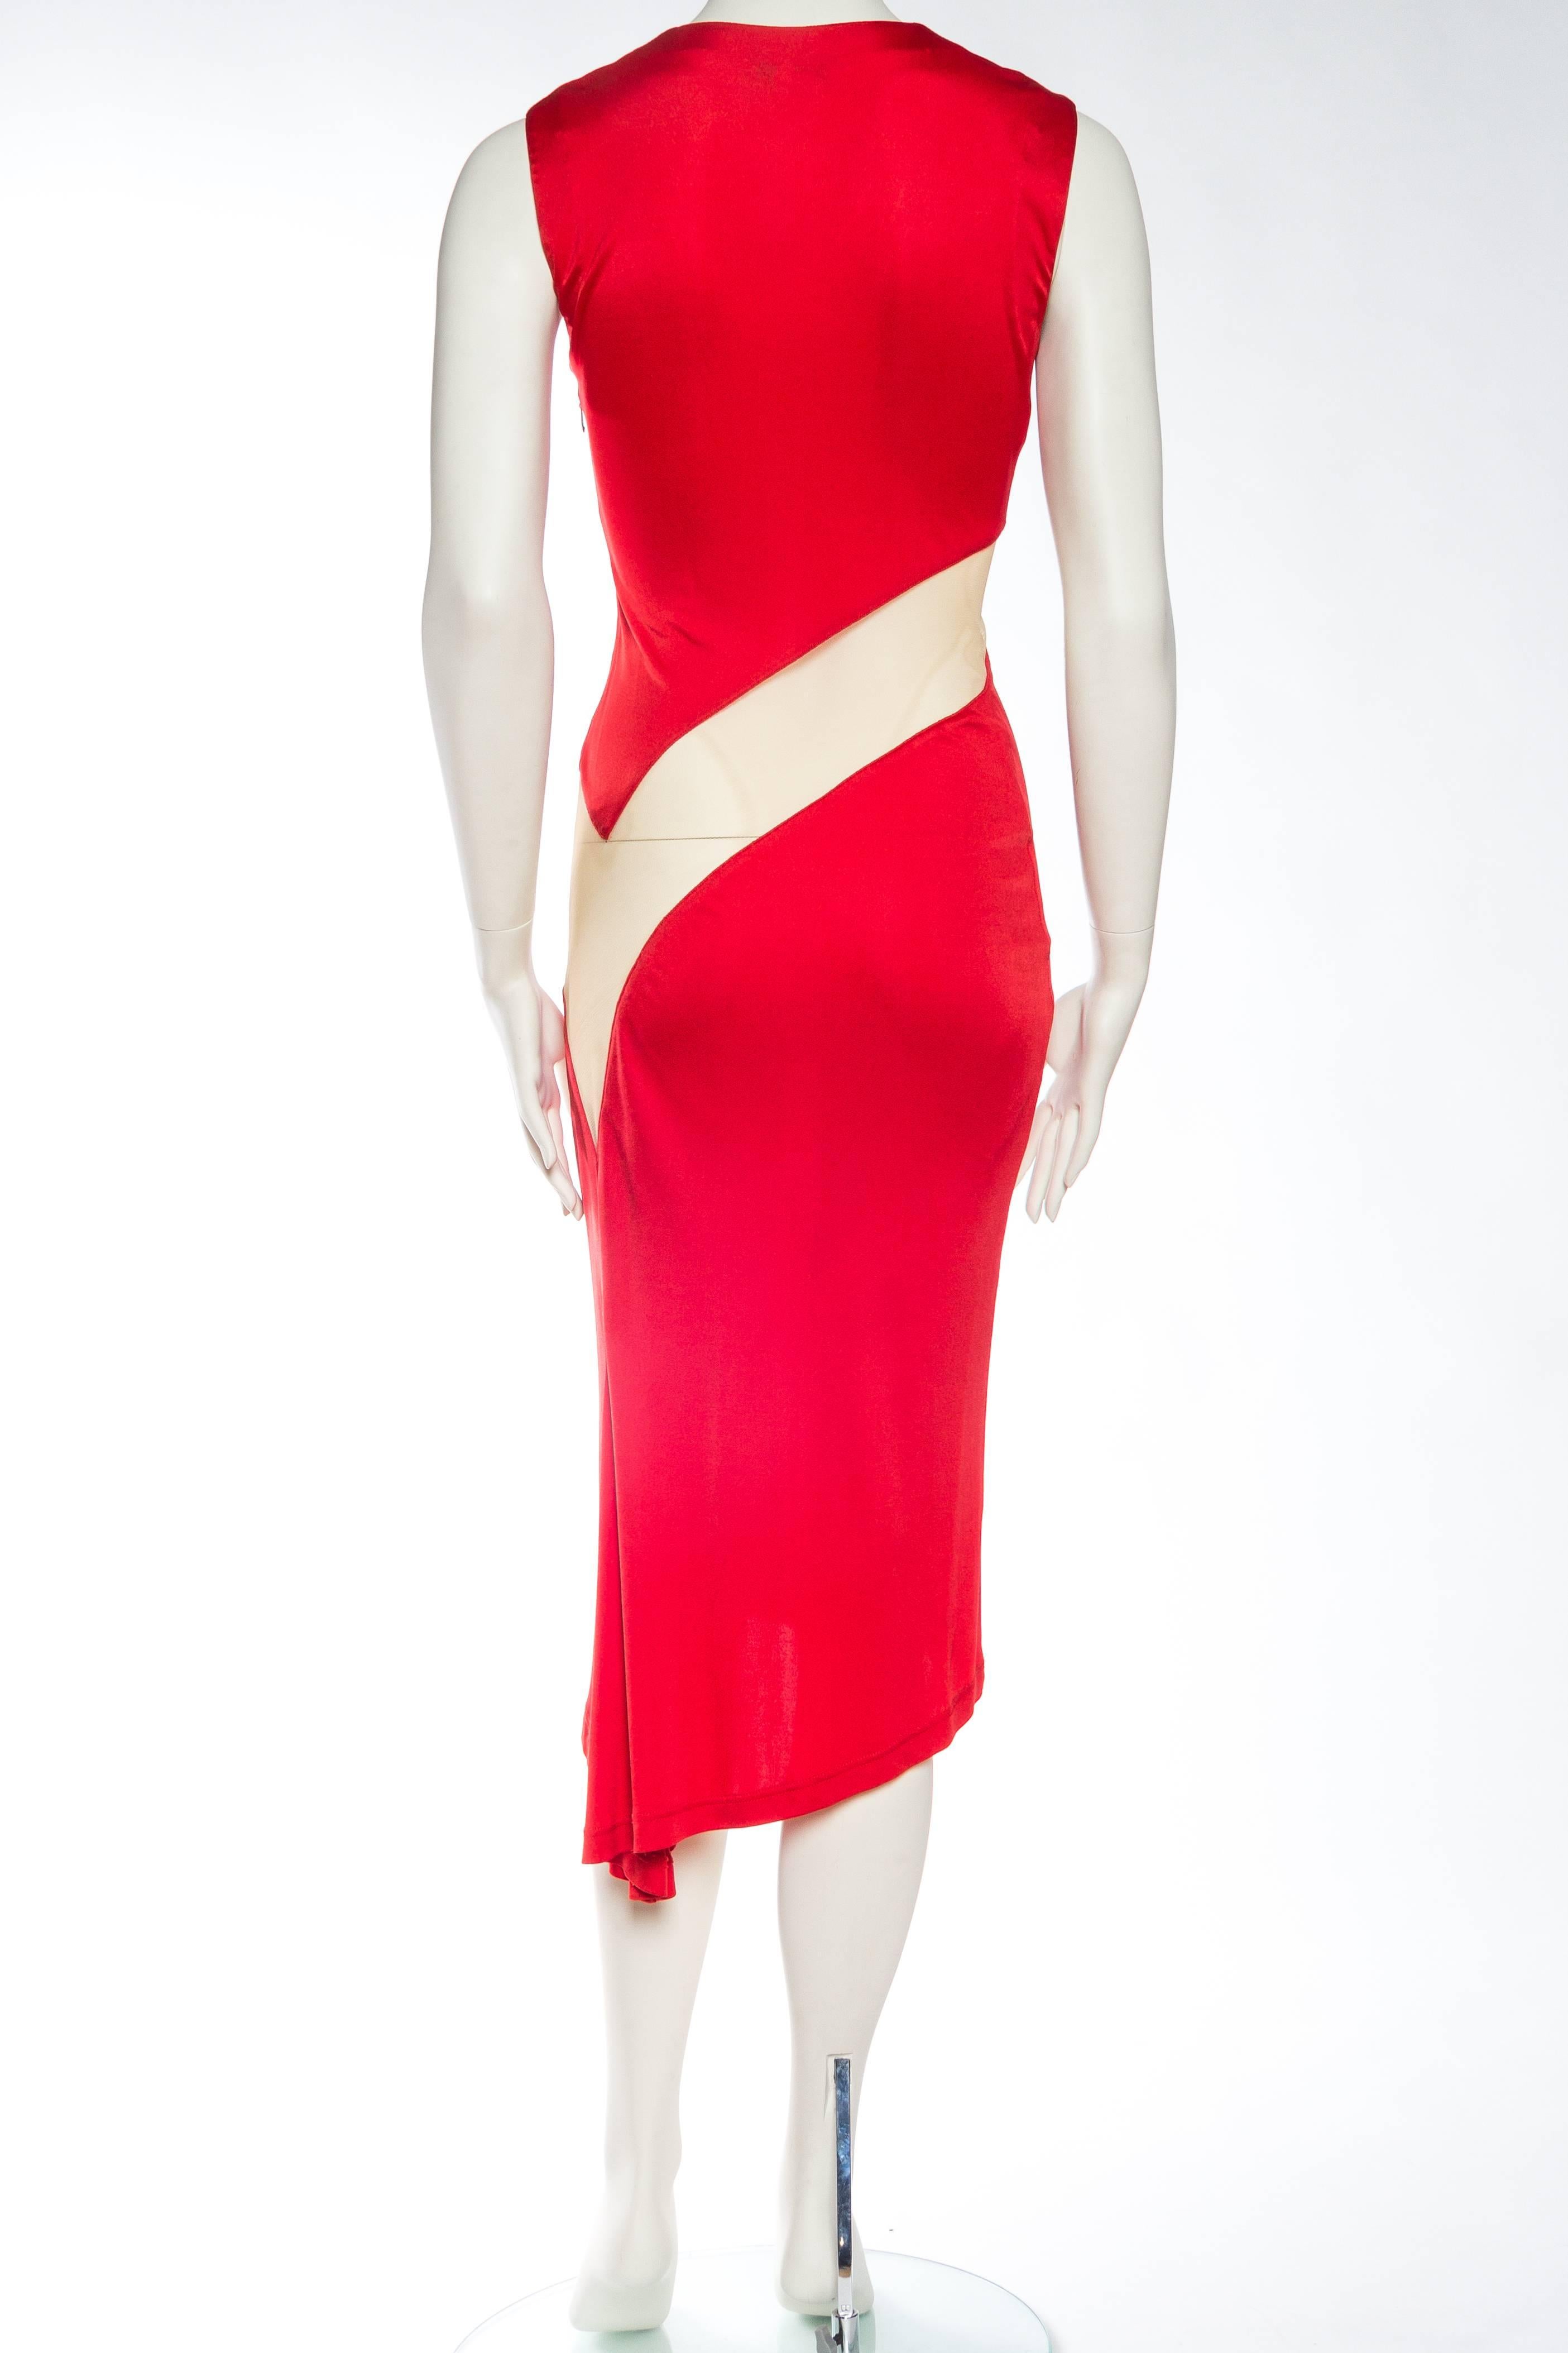 1990S ALEXANDER MCQUEEN Blood Red Acetate Jersey Nude Illusion Paneled Dress Fr In Excellent Condition For Sale In New York, NY